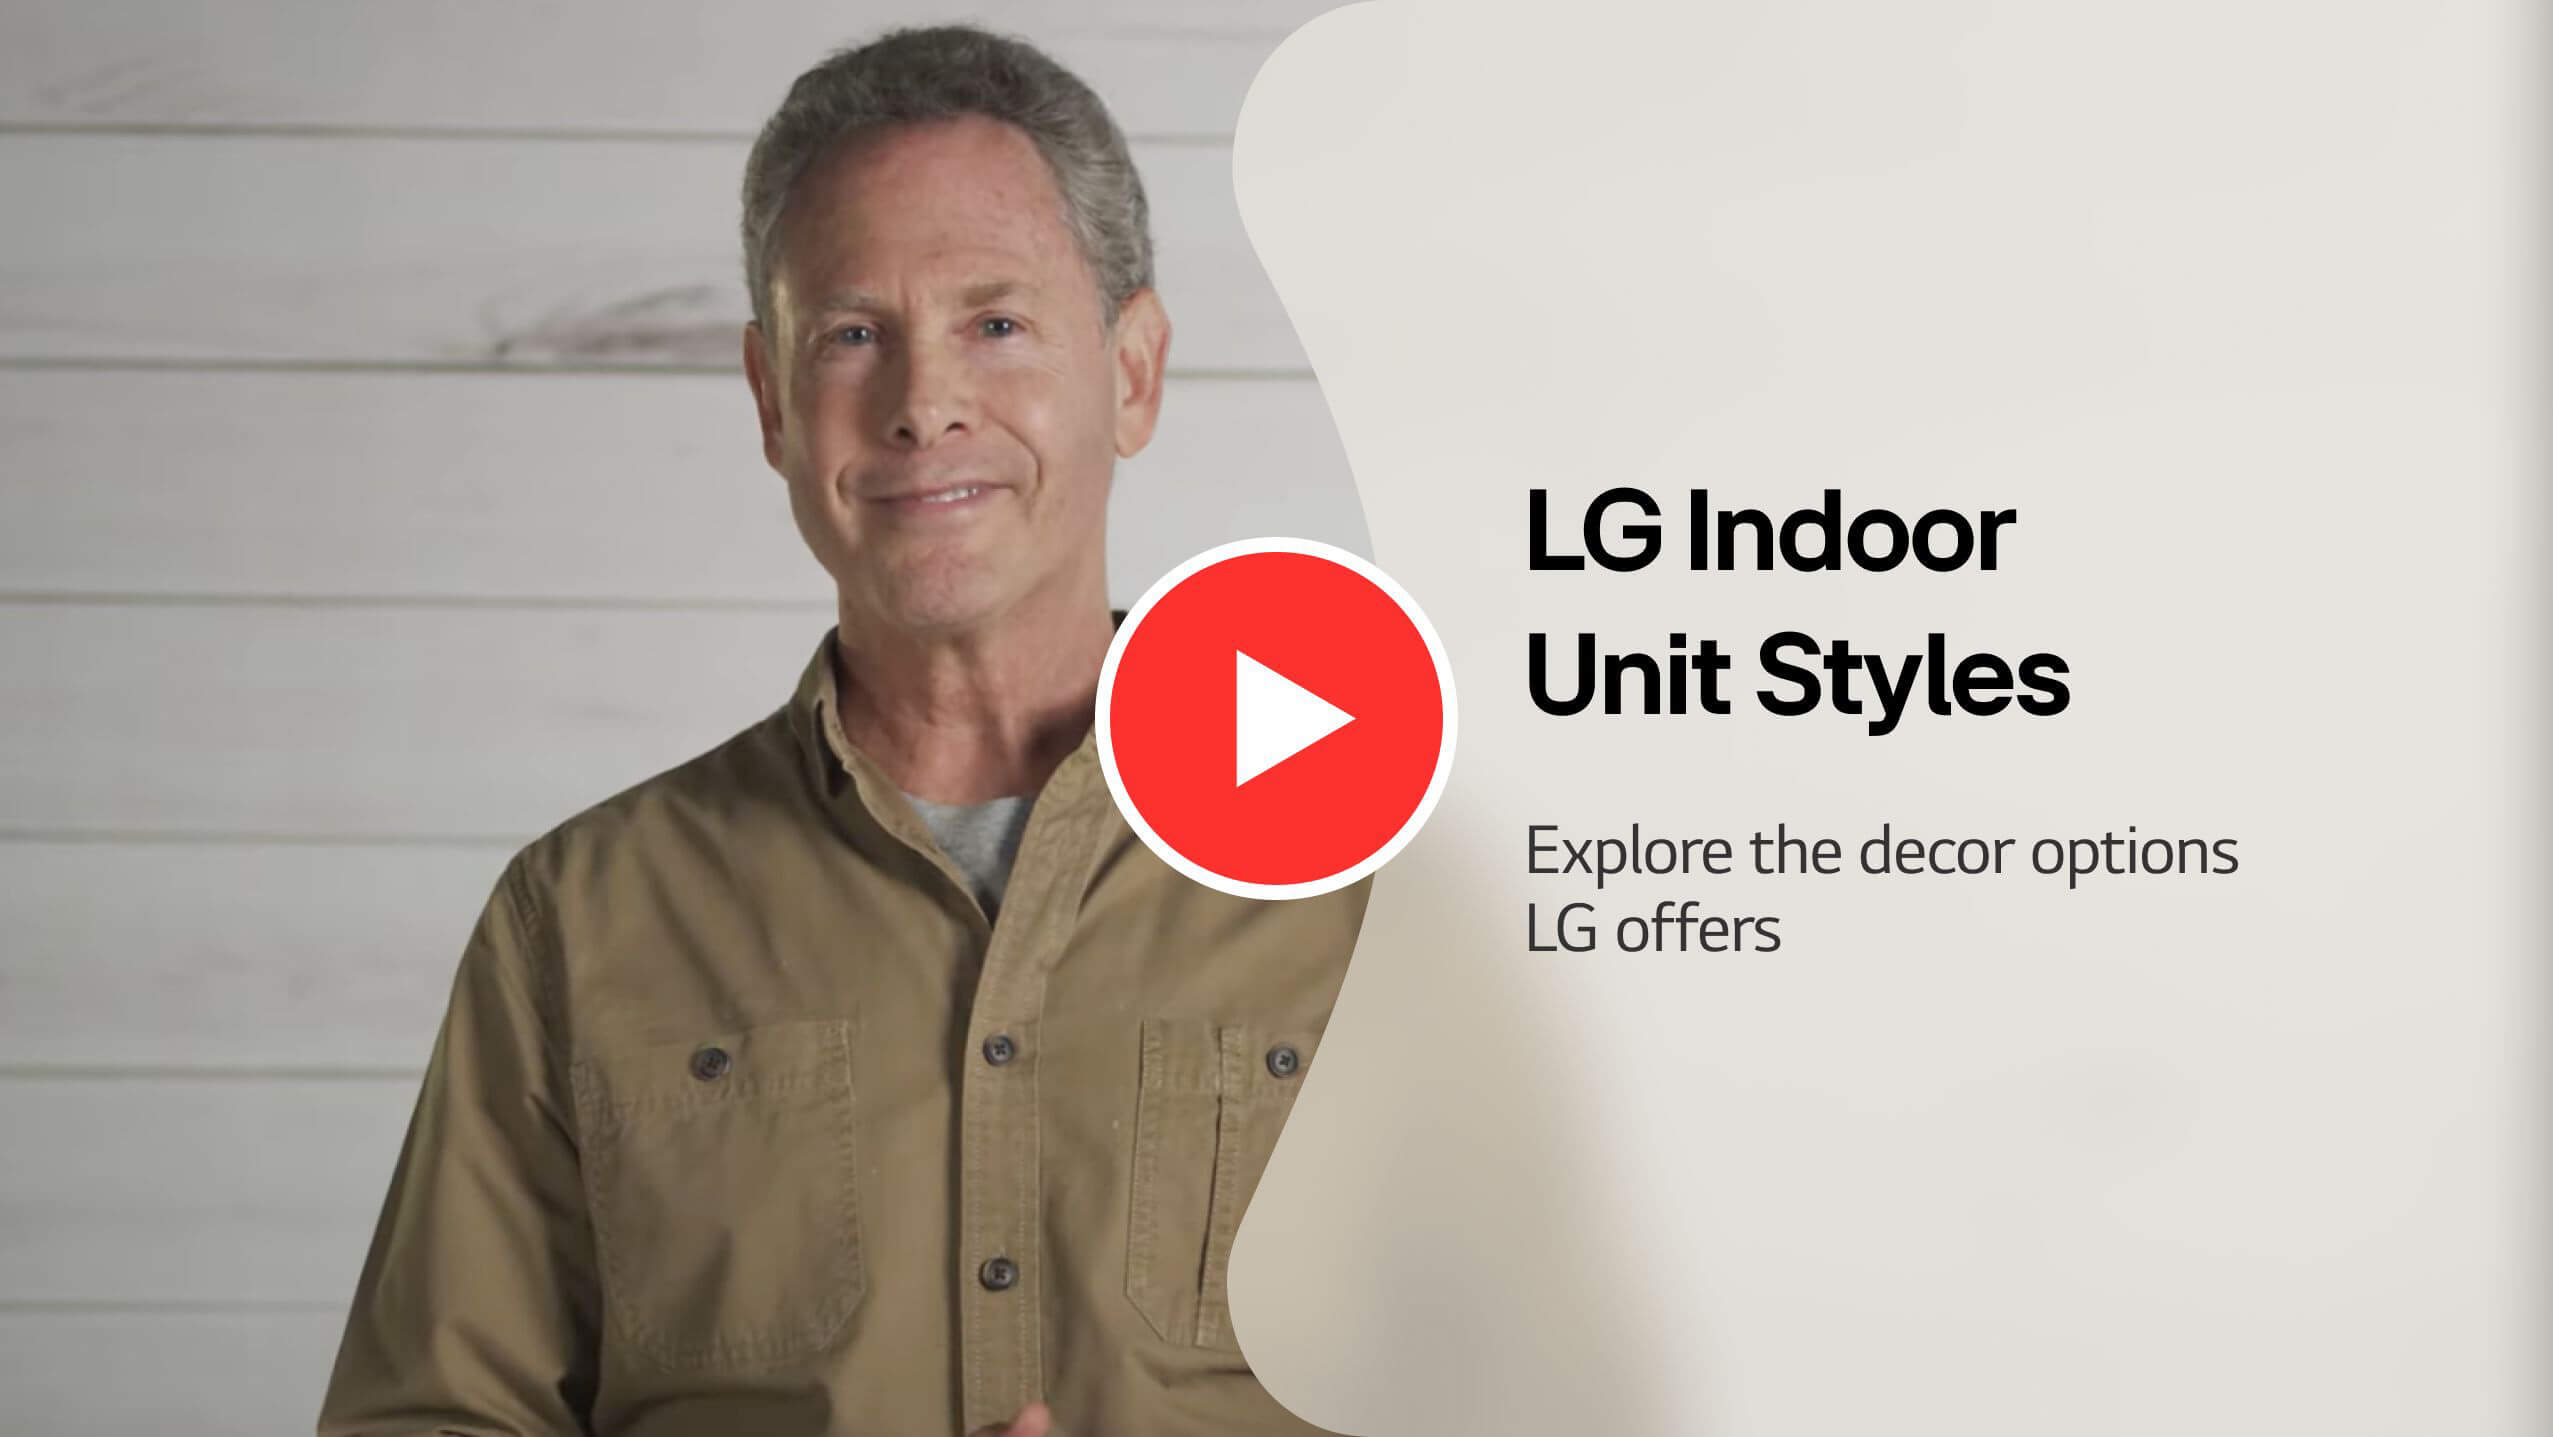 LG Indoor Unit Styles. Explore the decor options LG offers.